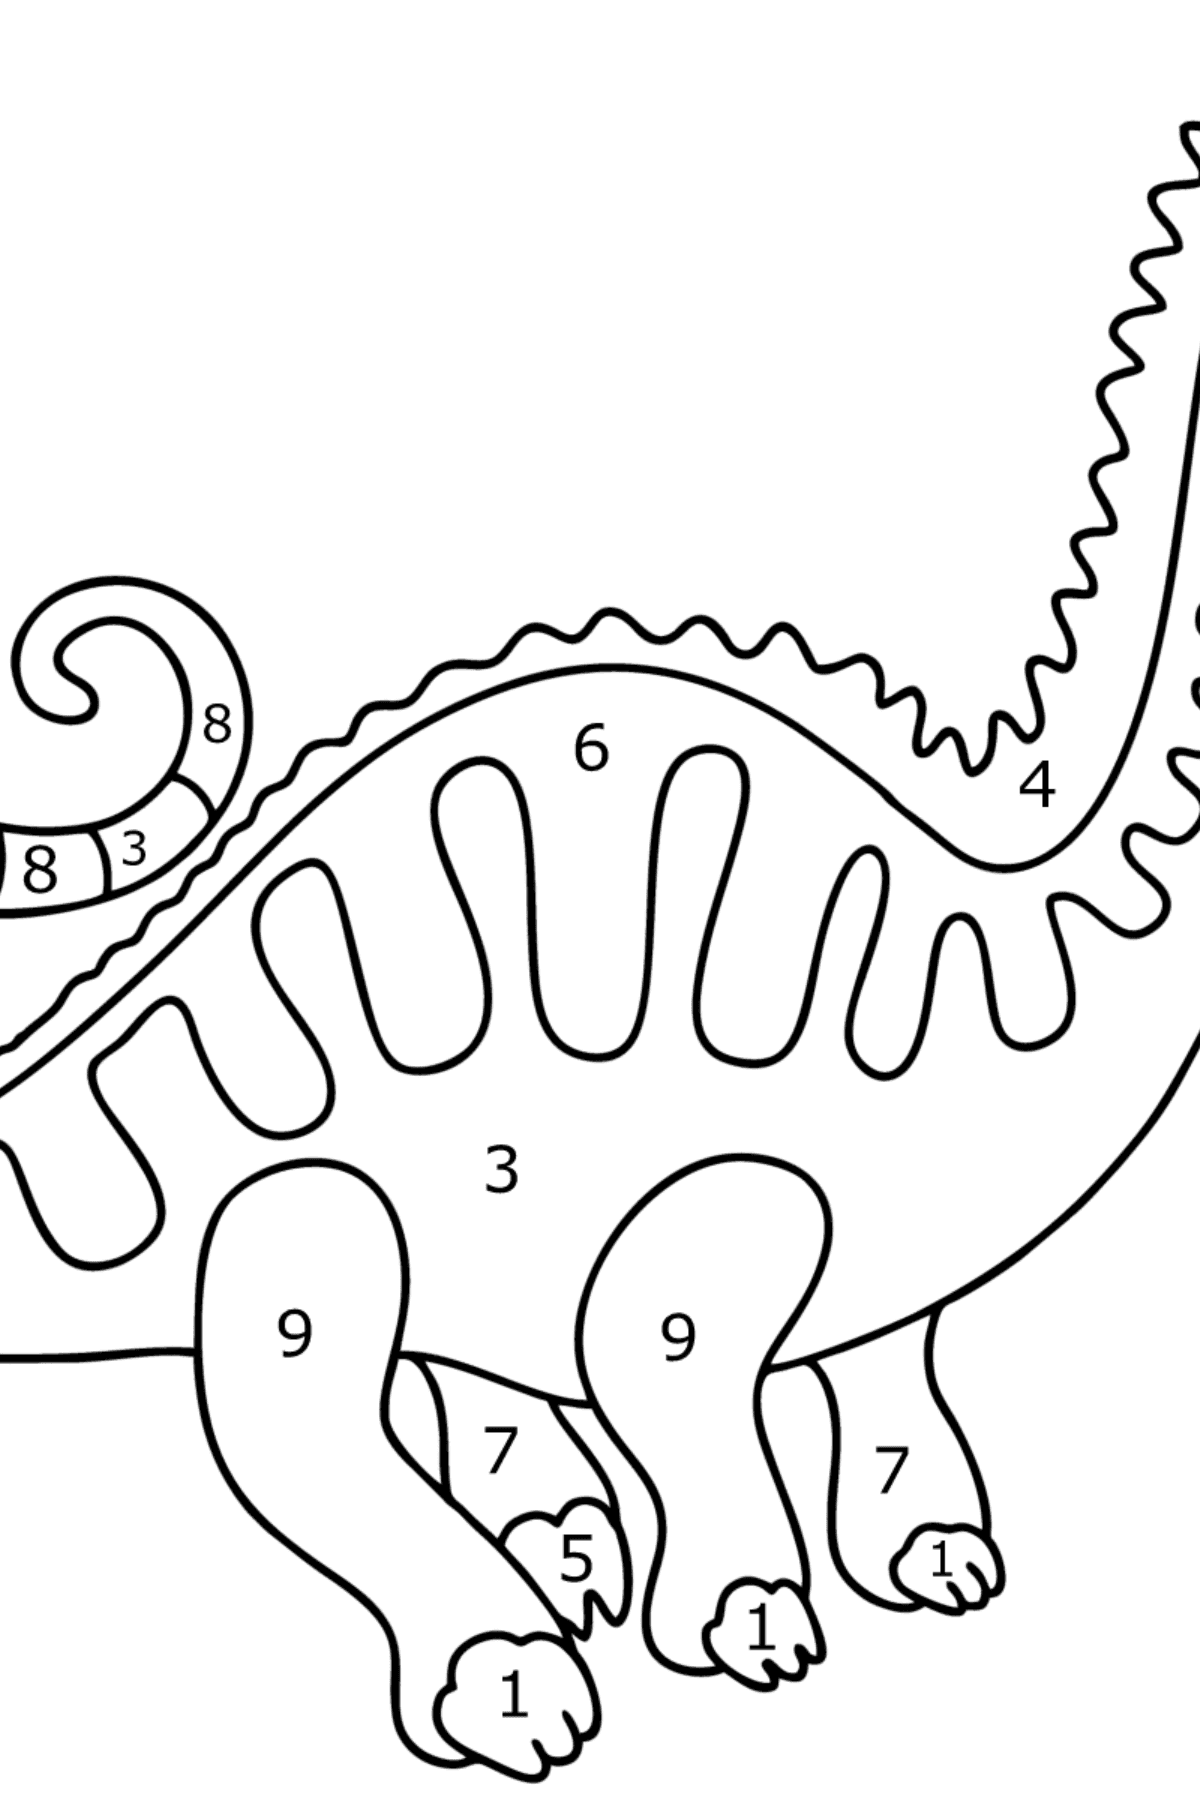 Apatosaurus coloring page - Coloring by Numbers for Kids